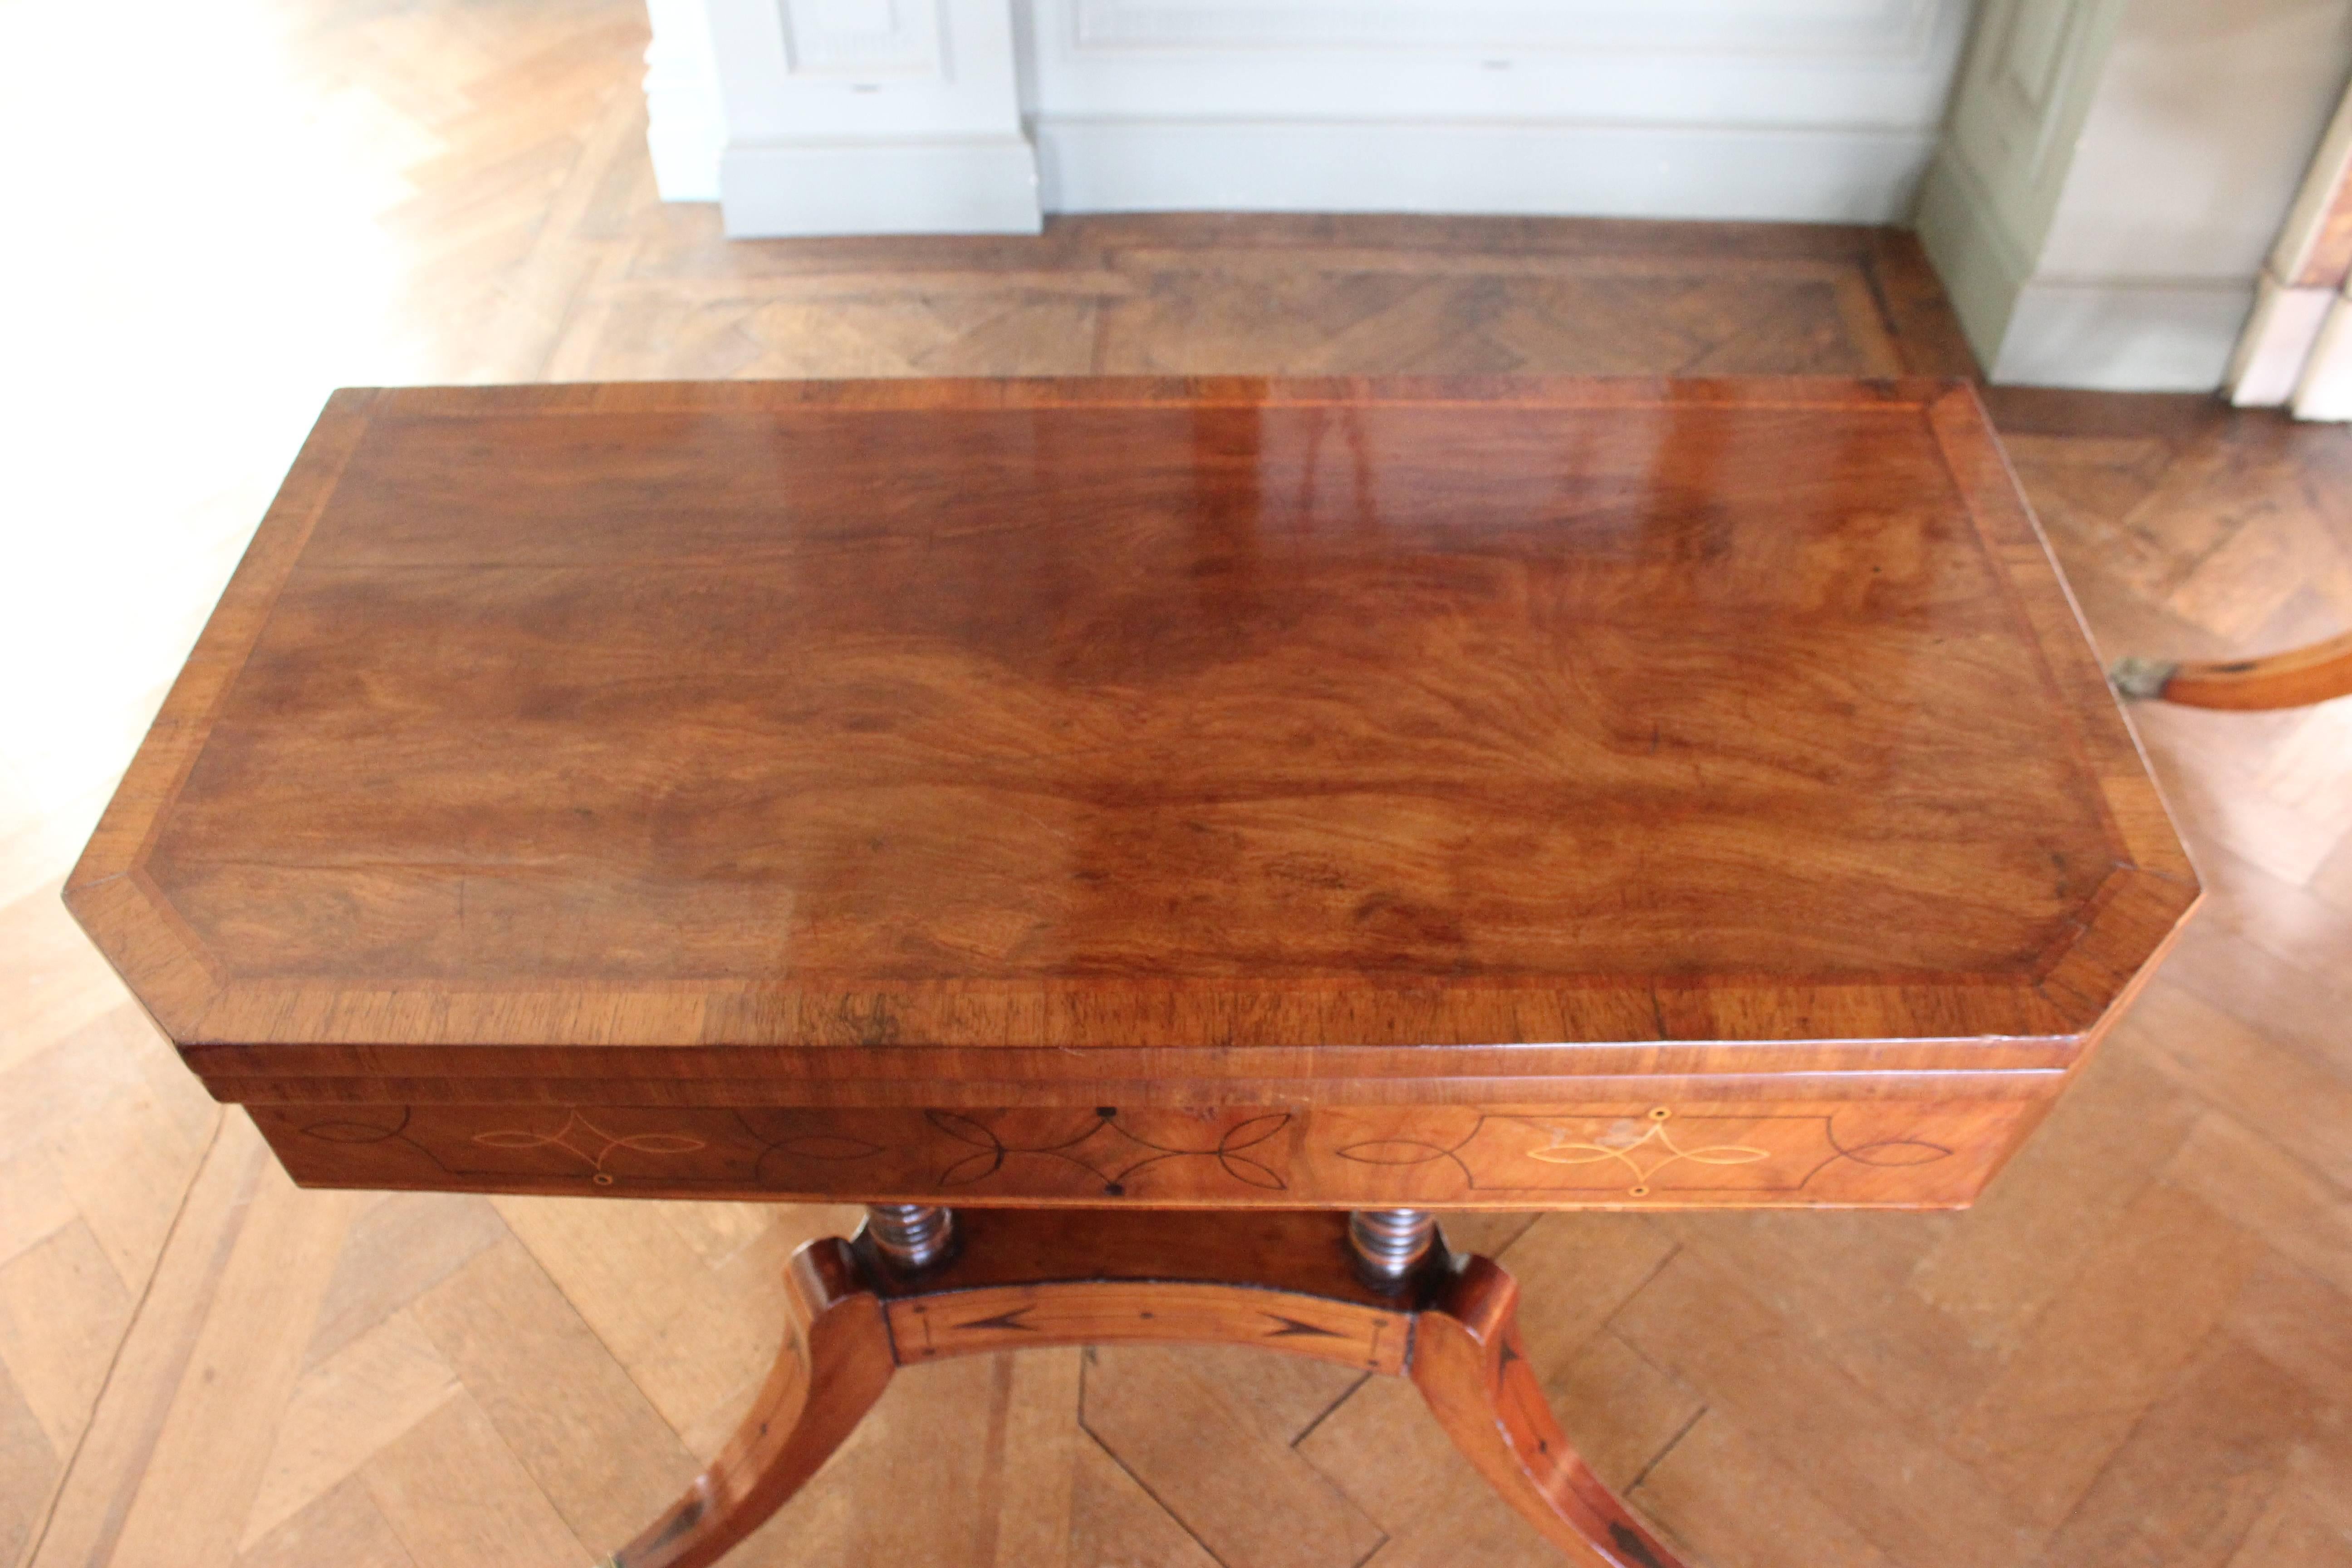 Good Pair of Regency Mahogany Card Tables with Ebony and Boxwood Inlay In Excellent Condition For Sale In Heswall, Wirral